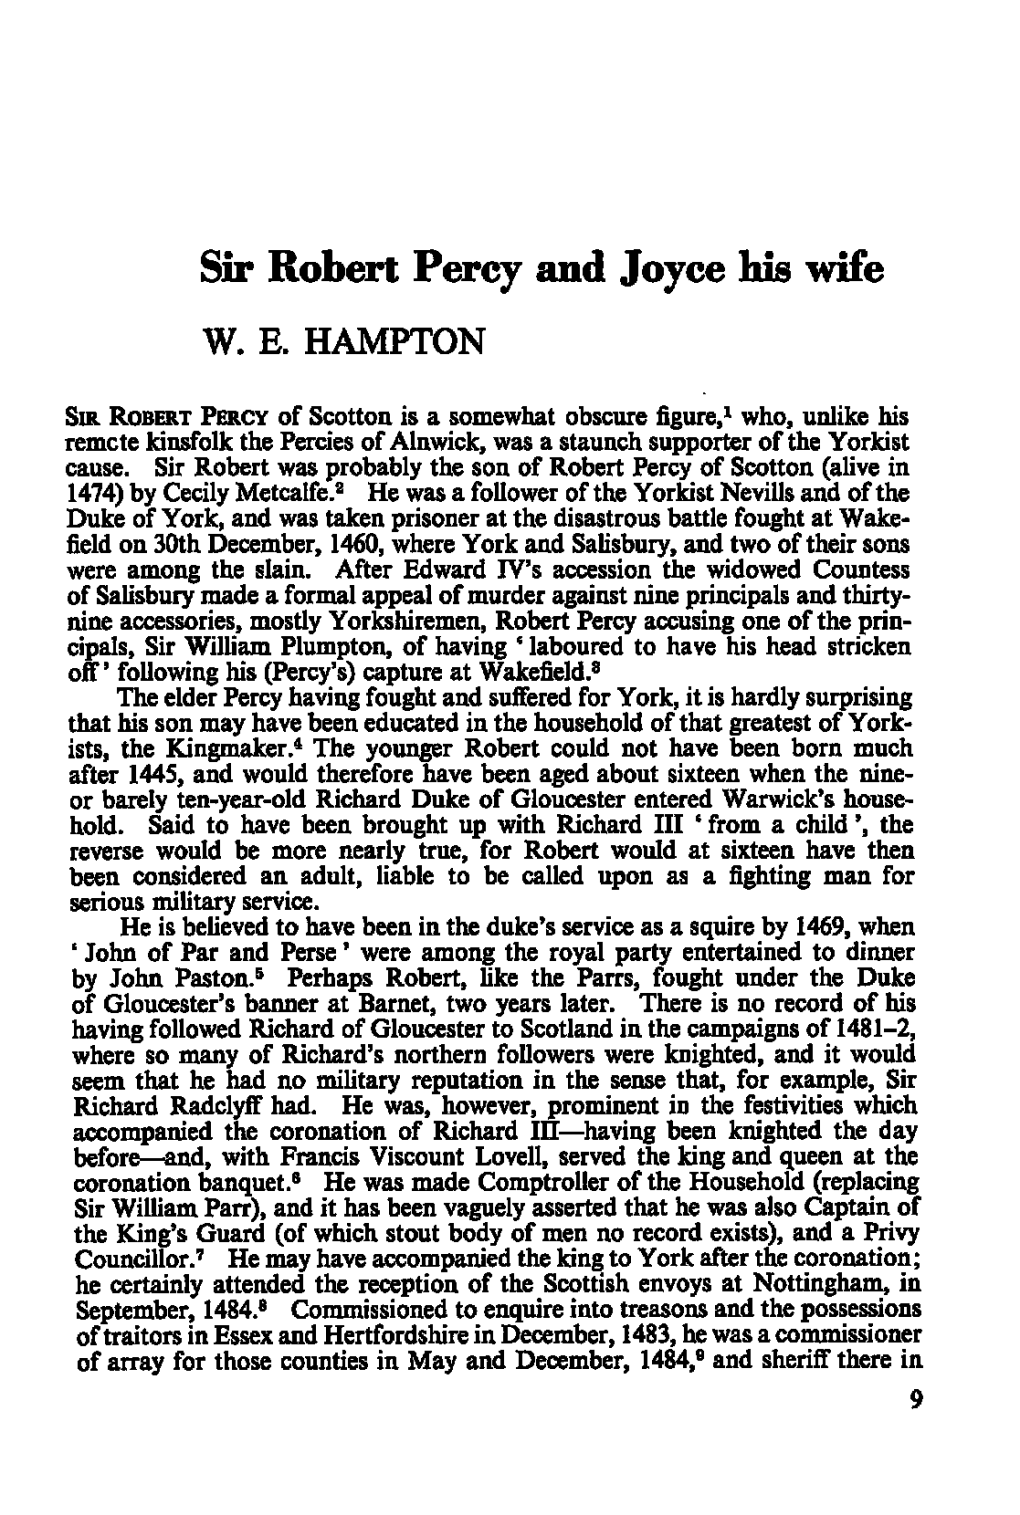 Sir Robert Percy and Joyce His Wife